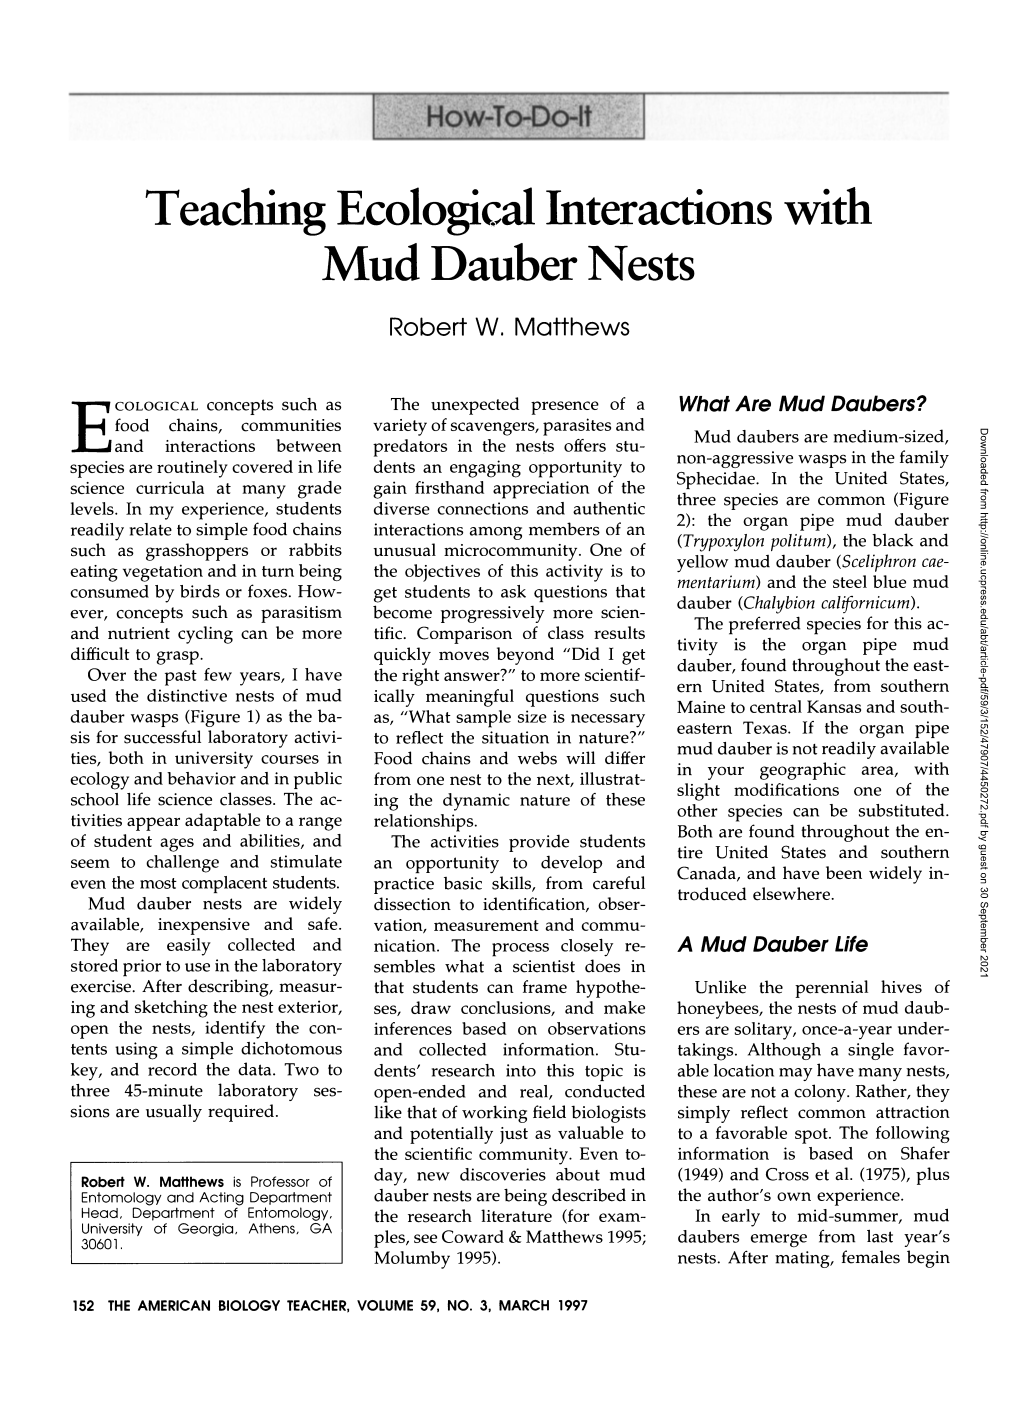 Teaching Ecological Interactions with Mud Dauber Nests